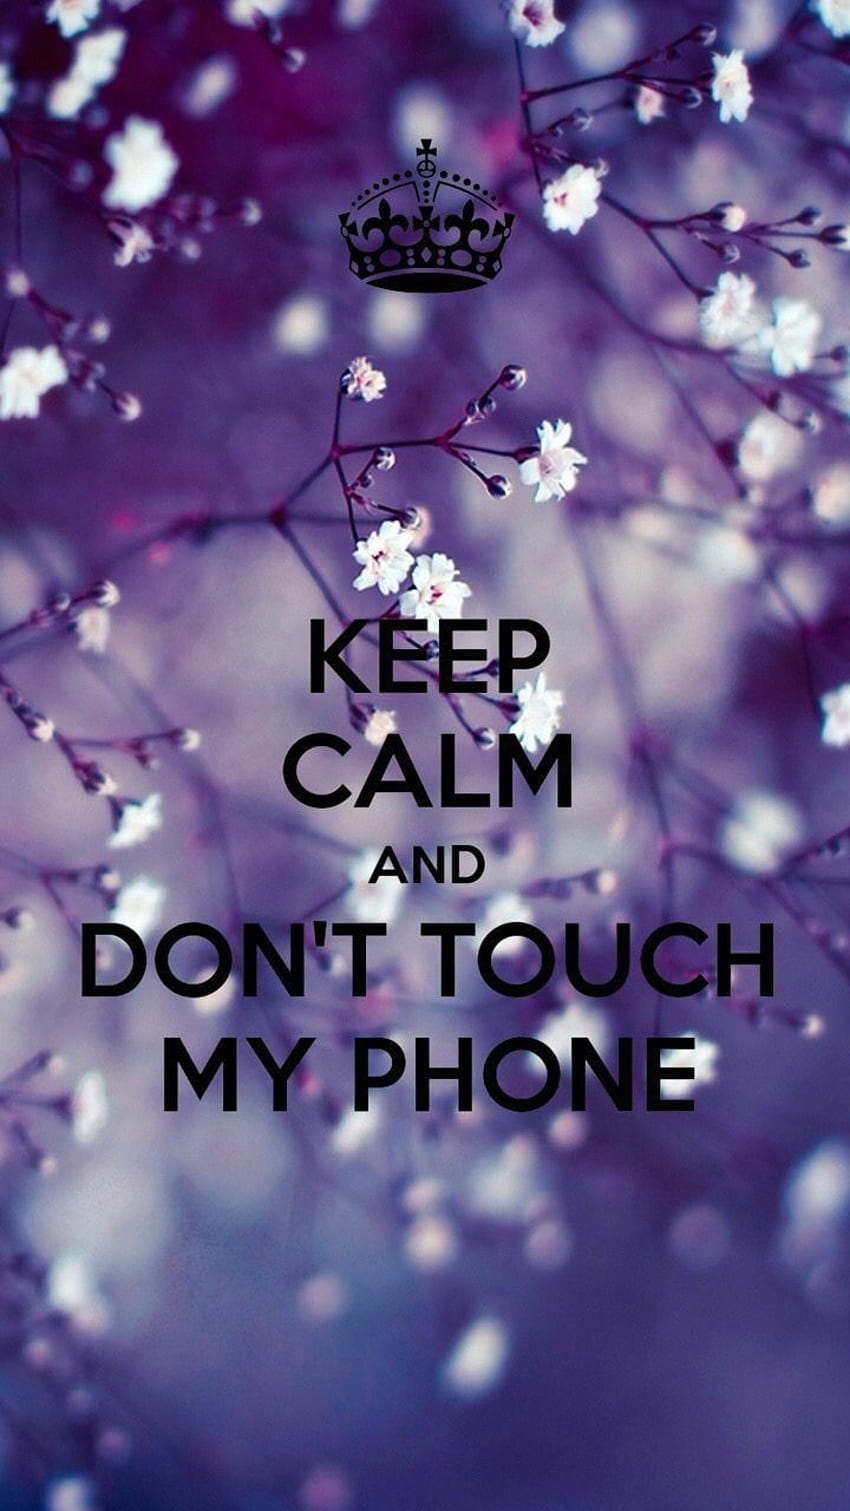 DP and whatsapp : Keep calm quotes and dp HD phone wallpaper